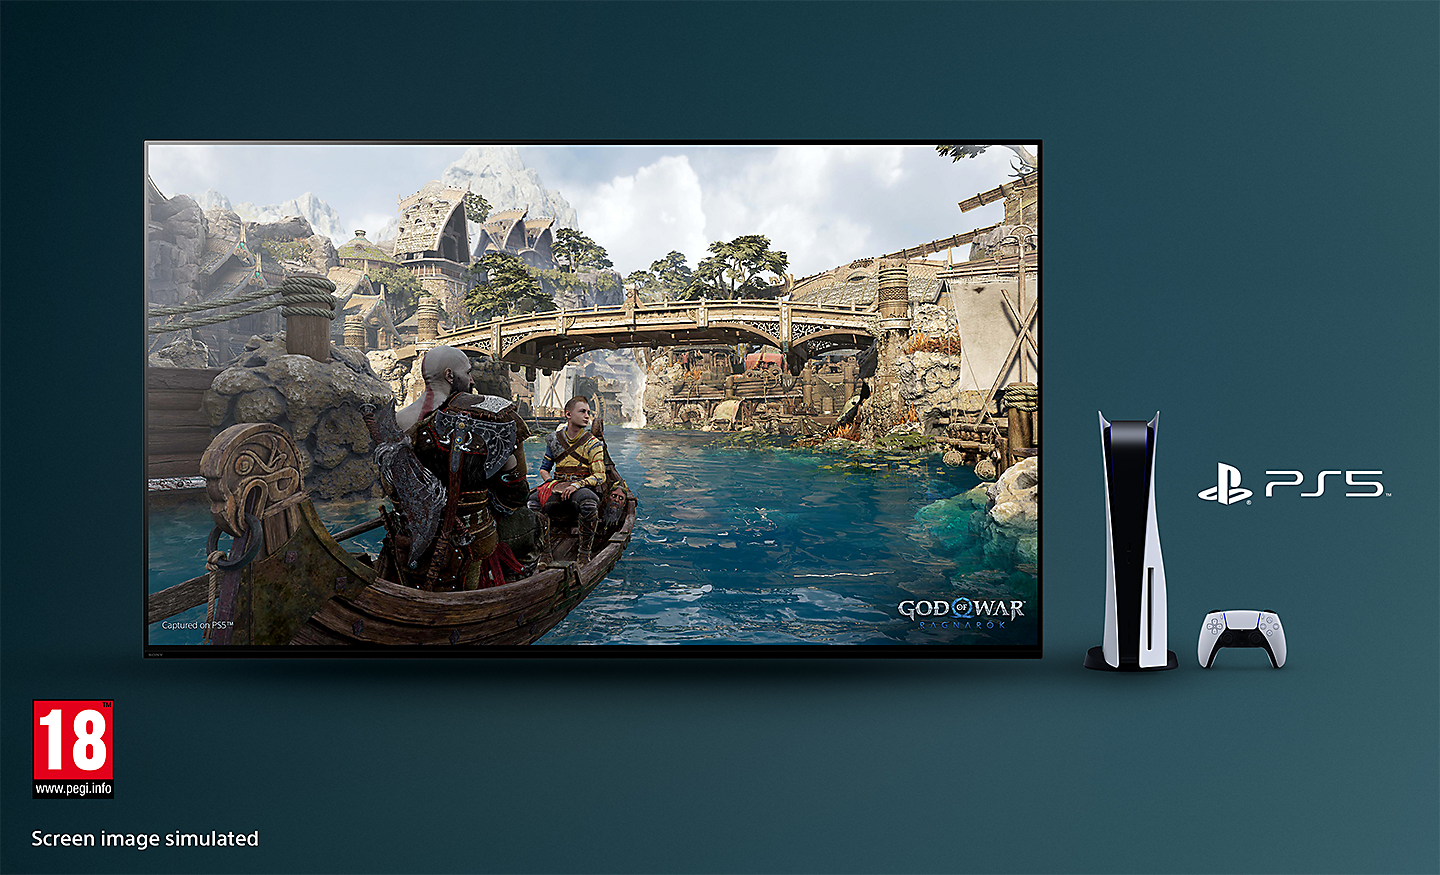 BRAVIA TV with screenshot of God of War: Ragnarok showing a boat on a river and bridge in background with PS5™ console, controller and PS5™ logo to the right of the TV and PEGI 18 logo bottom right